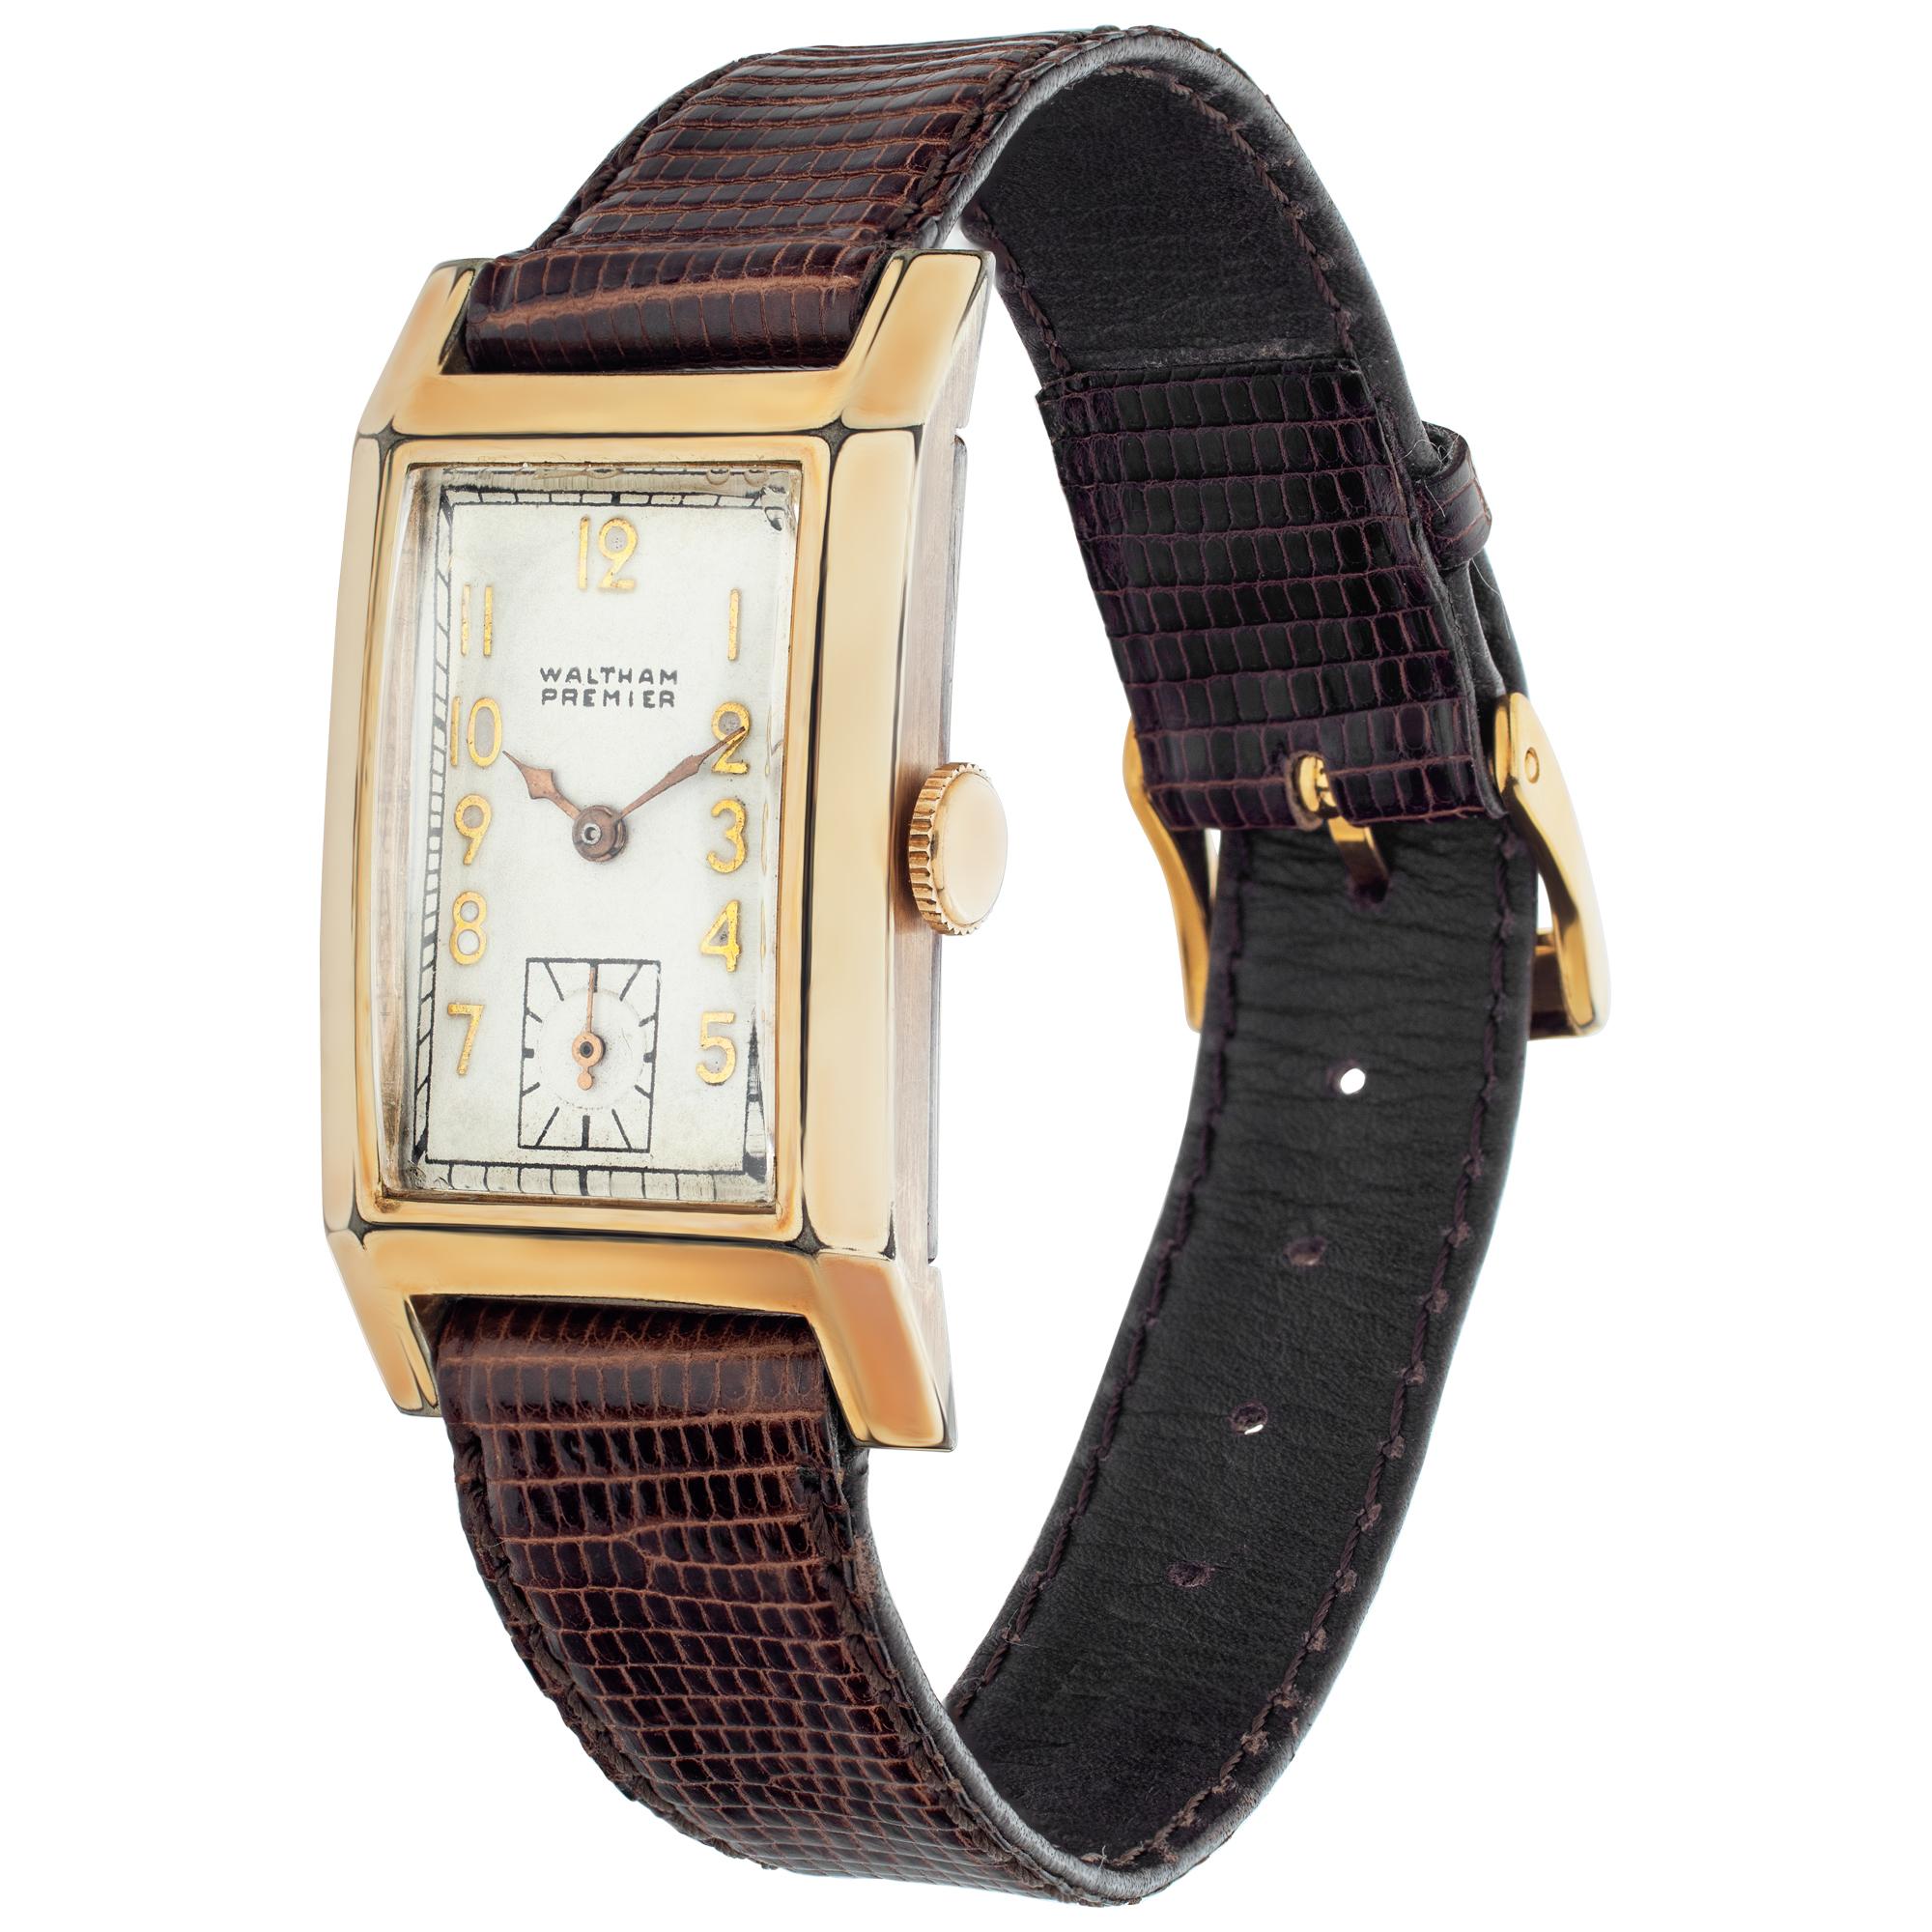 Waltham in gold fill on leather strap. Manual w/ subseconds. 19.5 mm case size. Circa 1935 Fine Pre-owned Waltham Watch. Certified preowned Vintage Waltham watch on a Brown Leather band with a Gold Fill Two Piece buckle. This Waltham watch has a